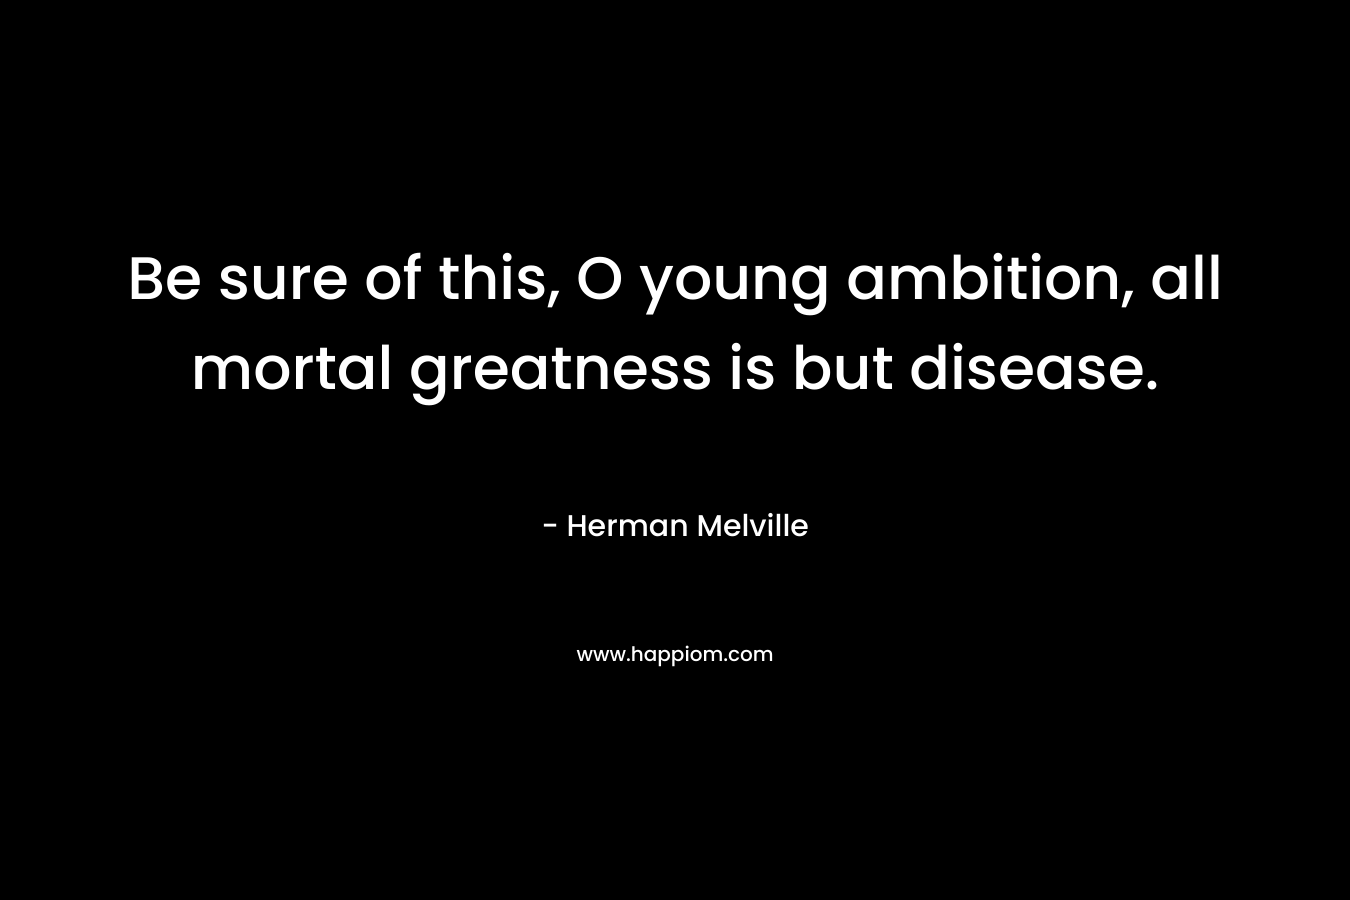 Be sure of this, O young ambition, all mortal greatness is but disease. – Herman Melville